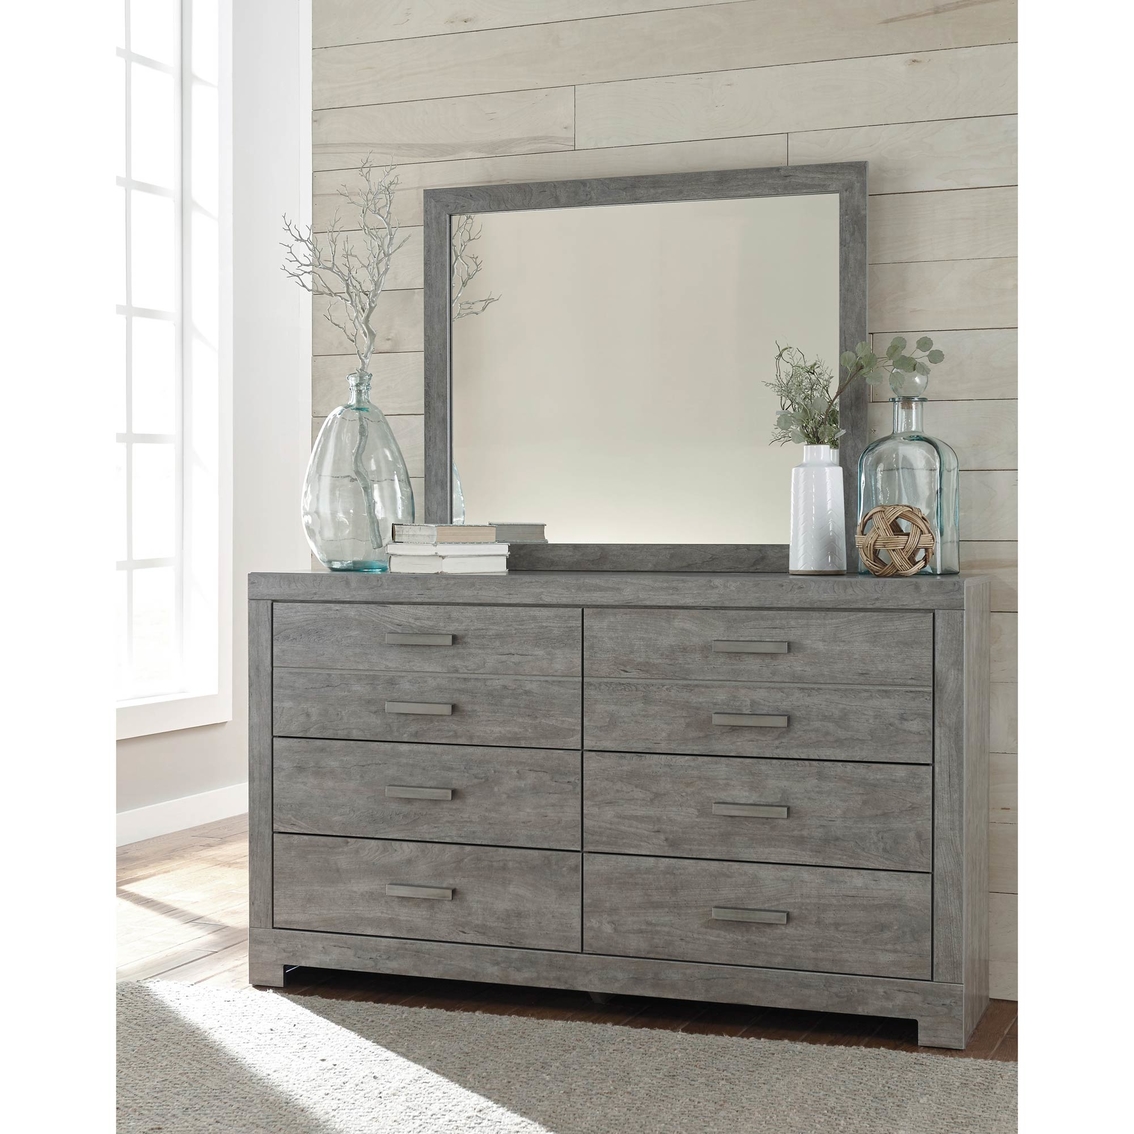 Signature Design by Ashley Culverbach Dresser and Mirror Set - Image 2 of 4